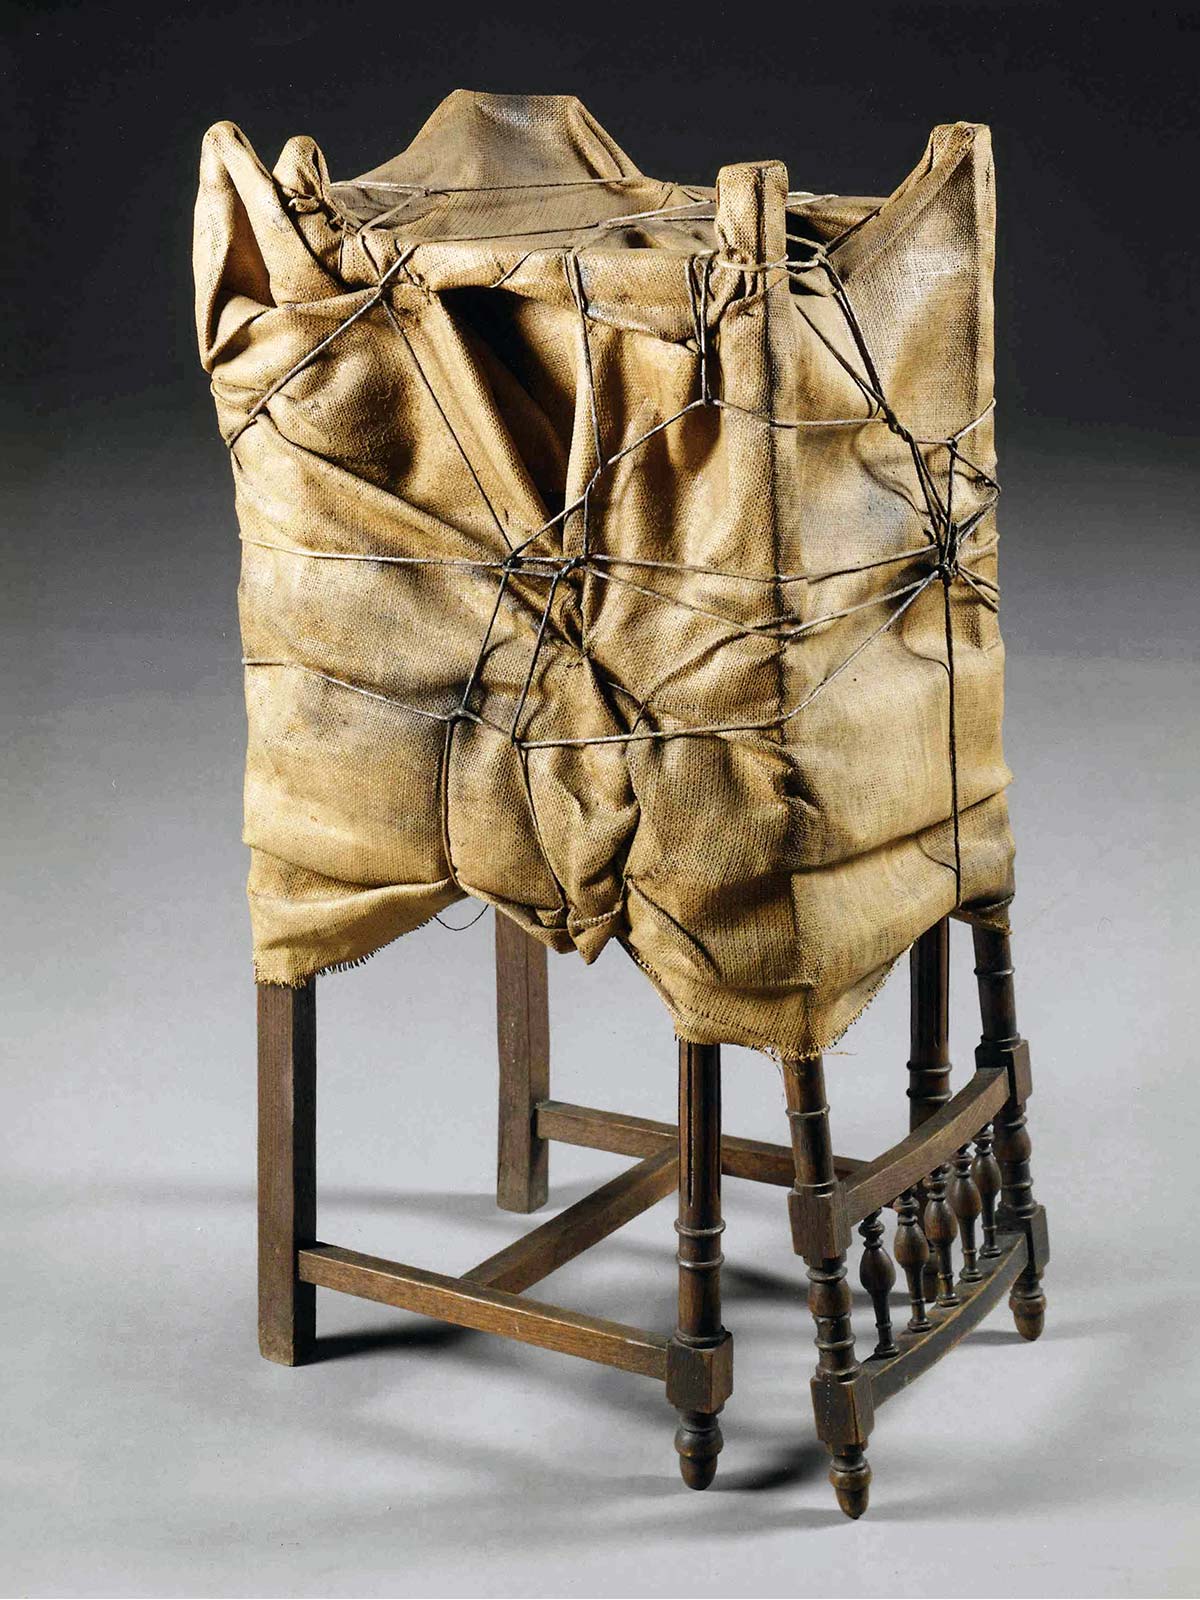 Two Wrapped Chairs by Christo - Photo © Wolfgang Volz